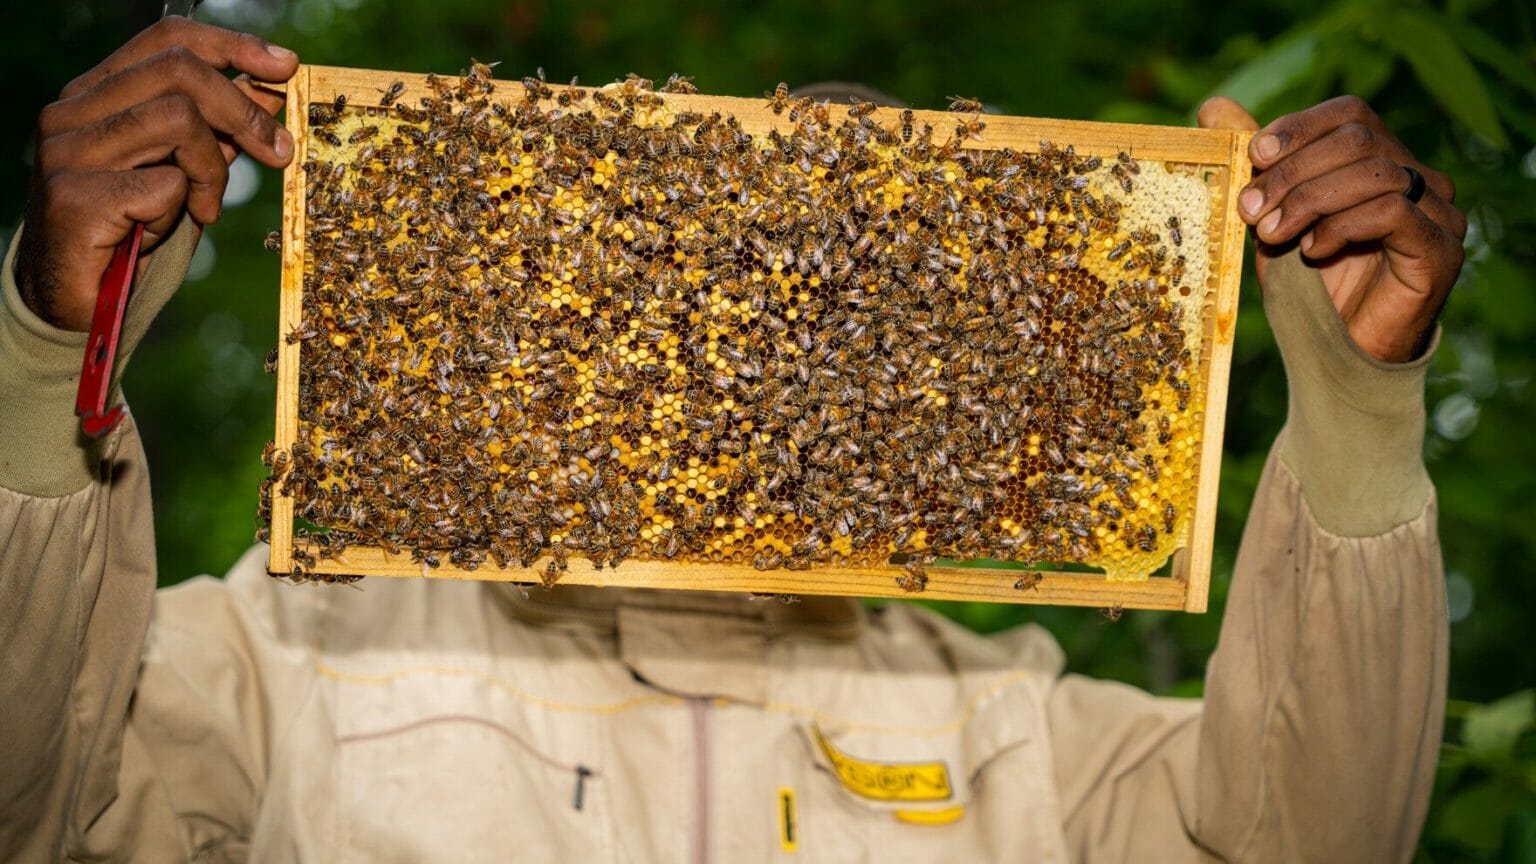 Alaska-bound bees find new homes after shipping disaster